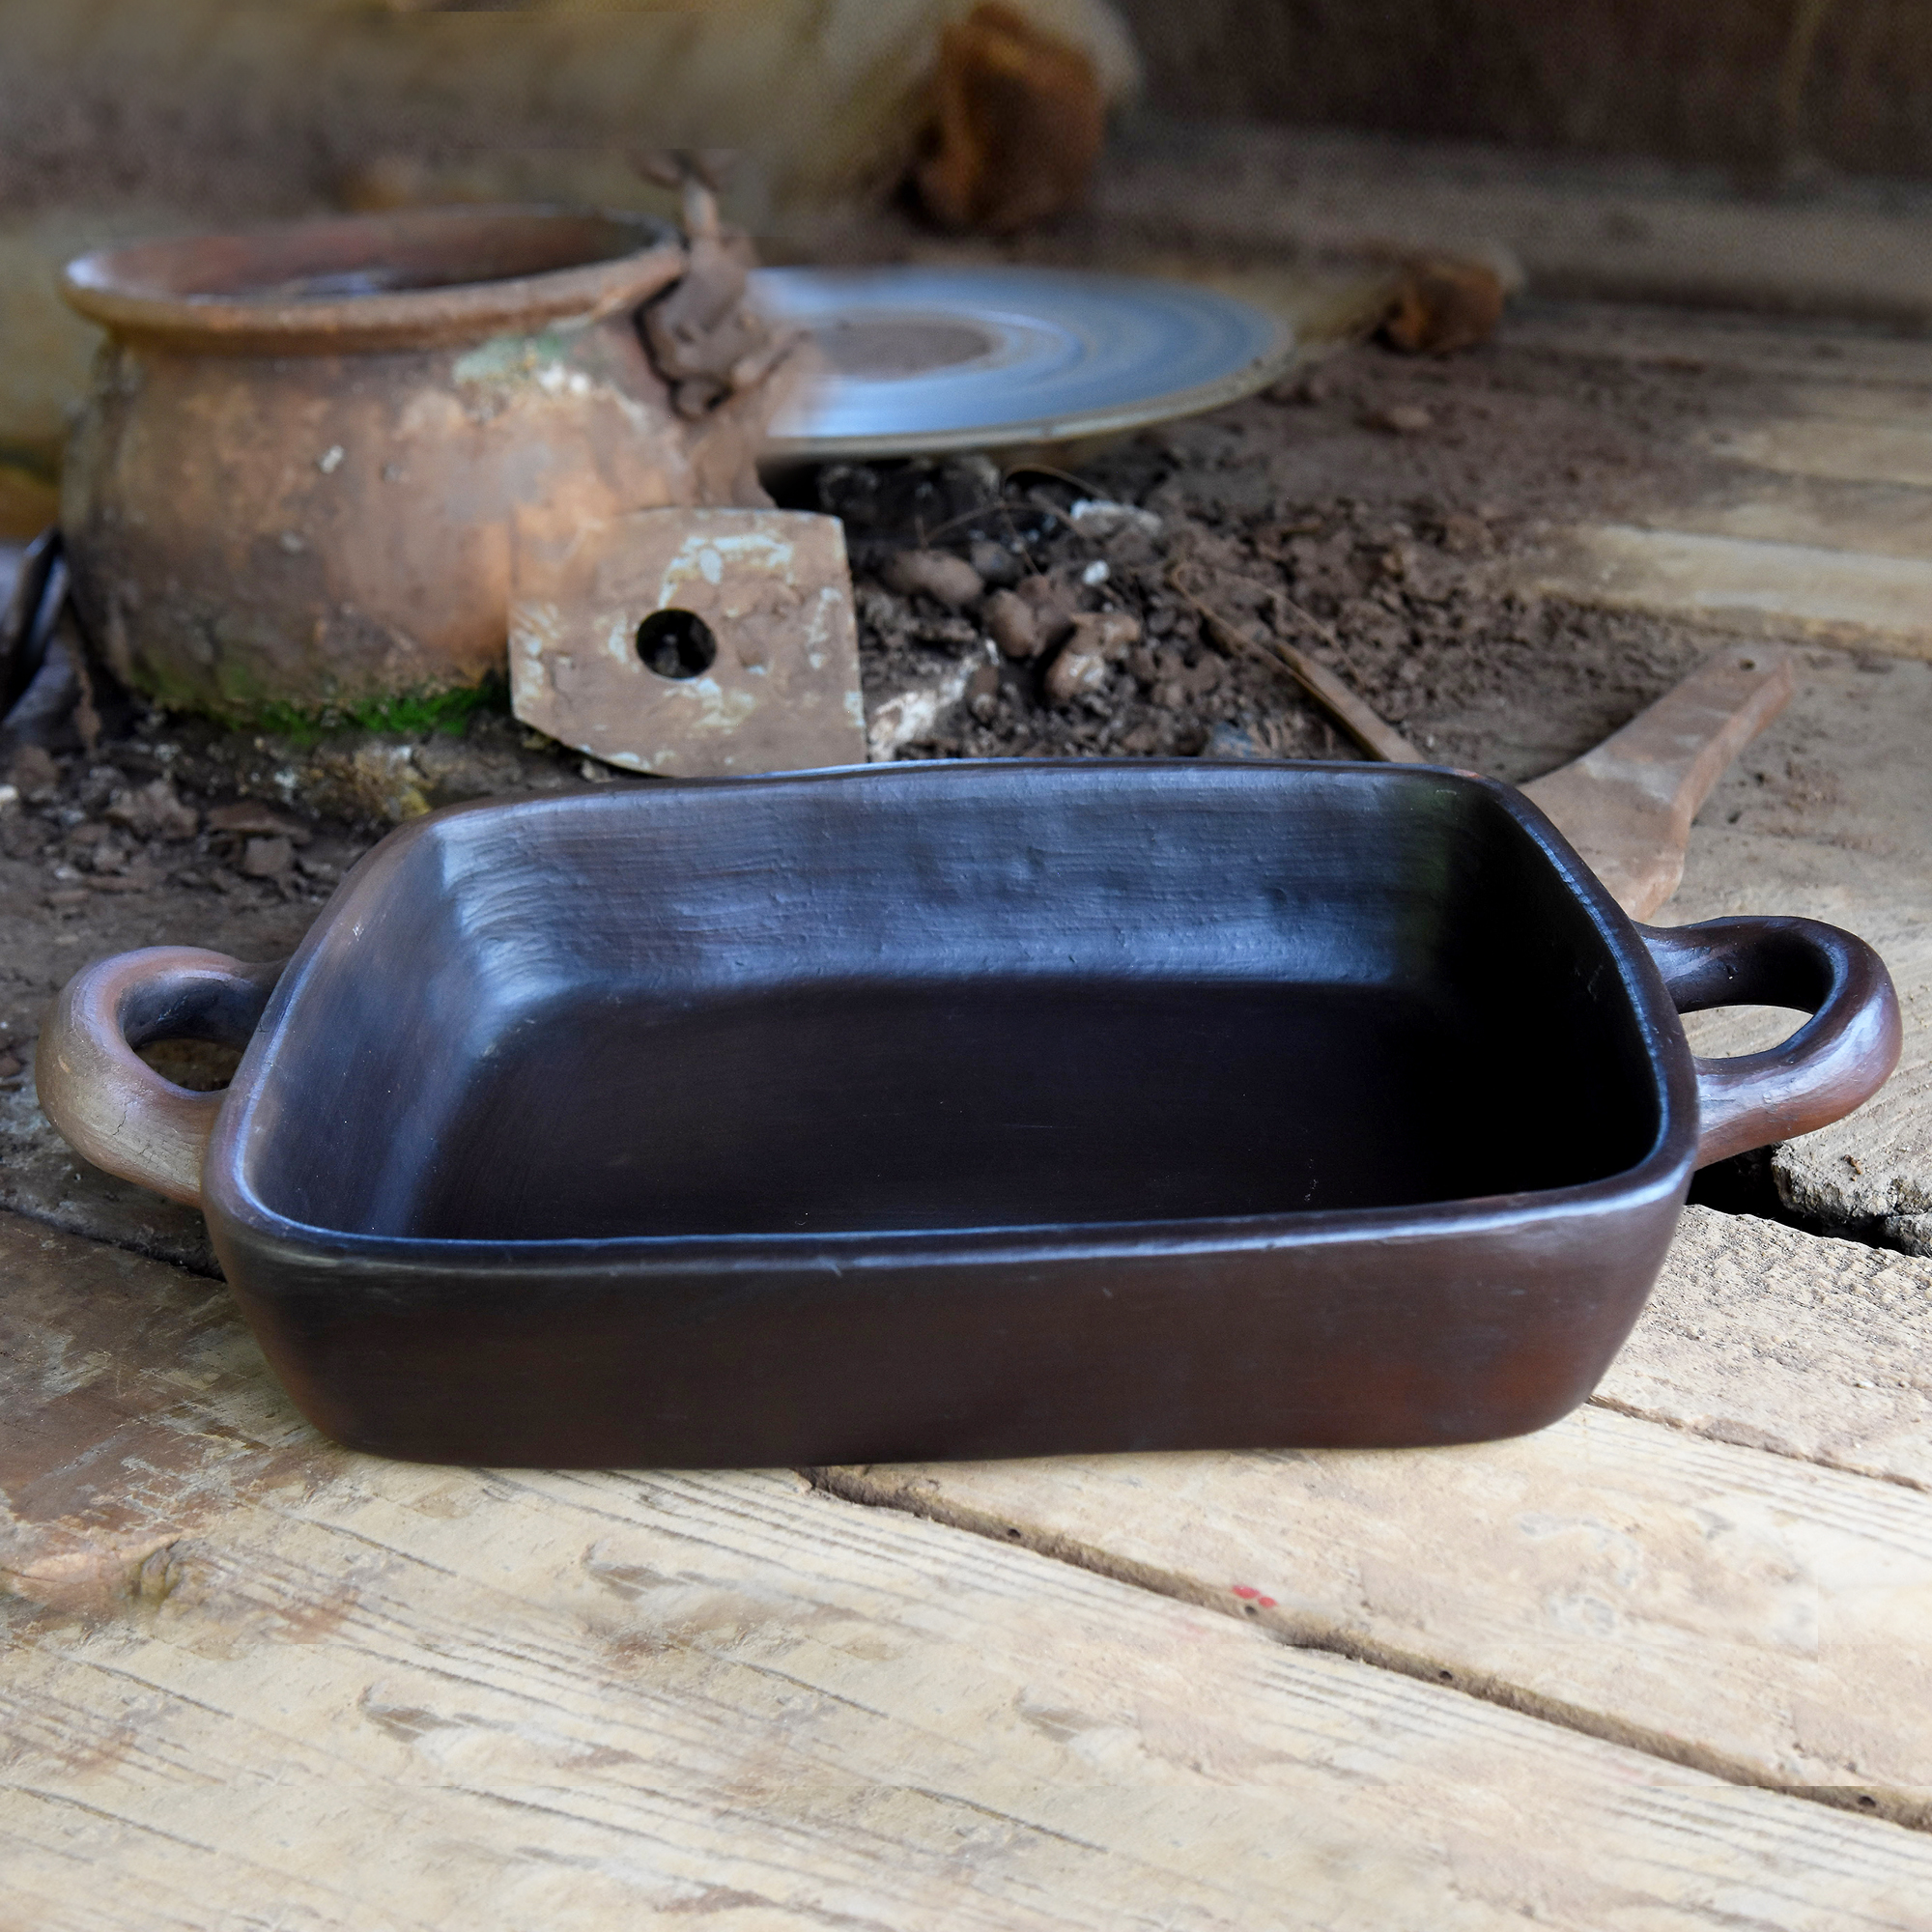 https://ancientcookware.com/images/stories/virtuemart/product/chl_5039_12_3%20large.jpg